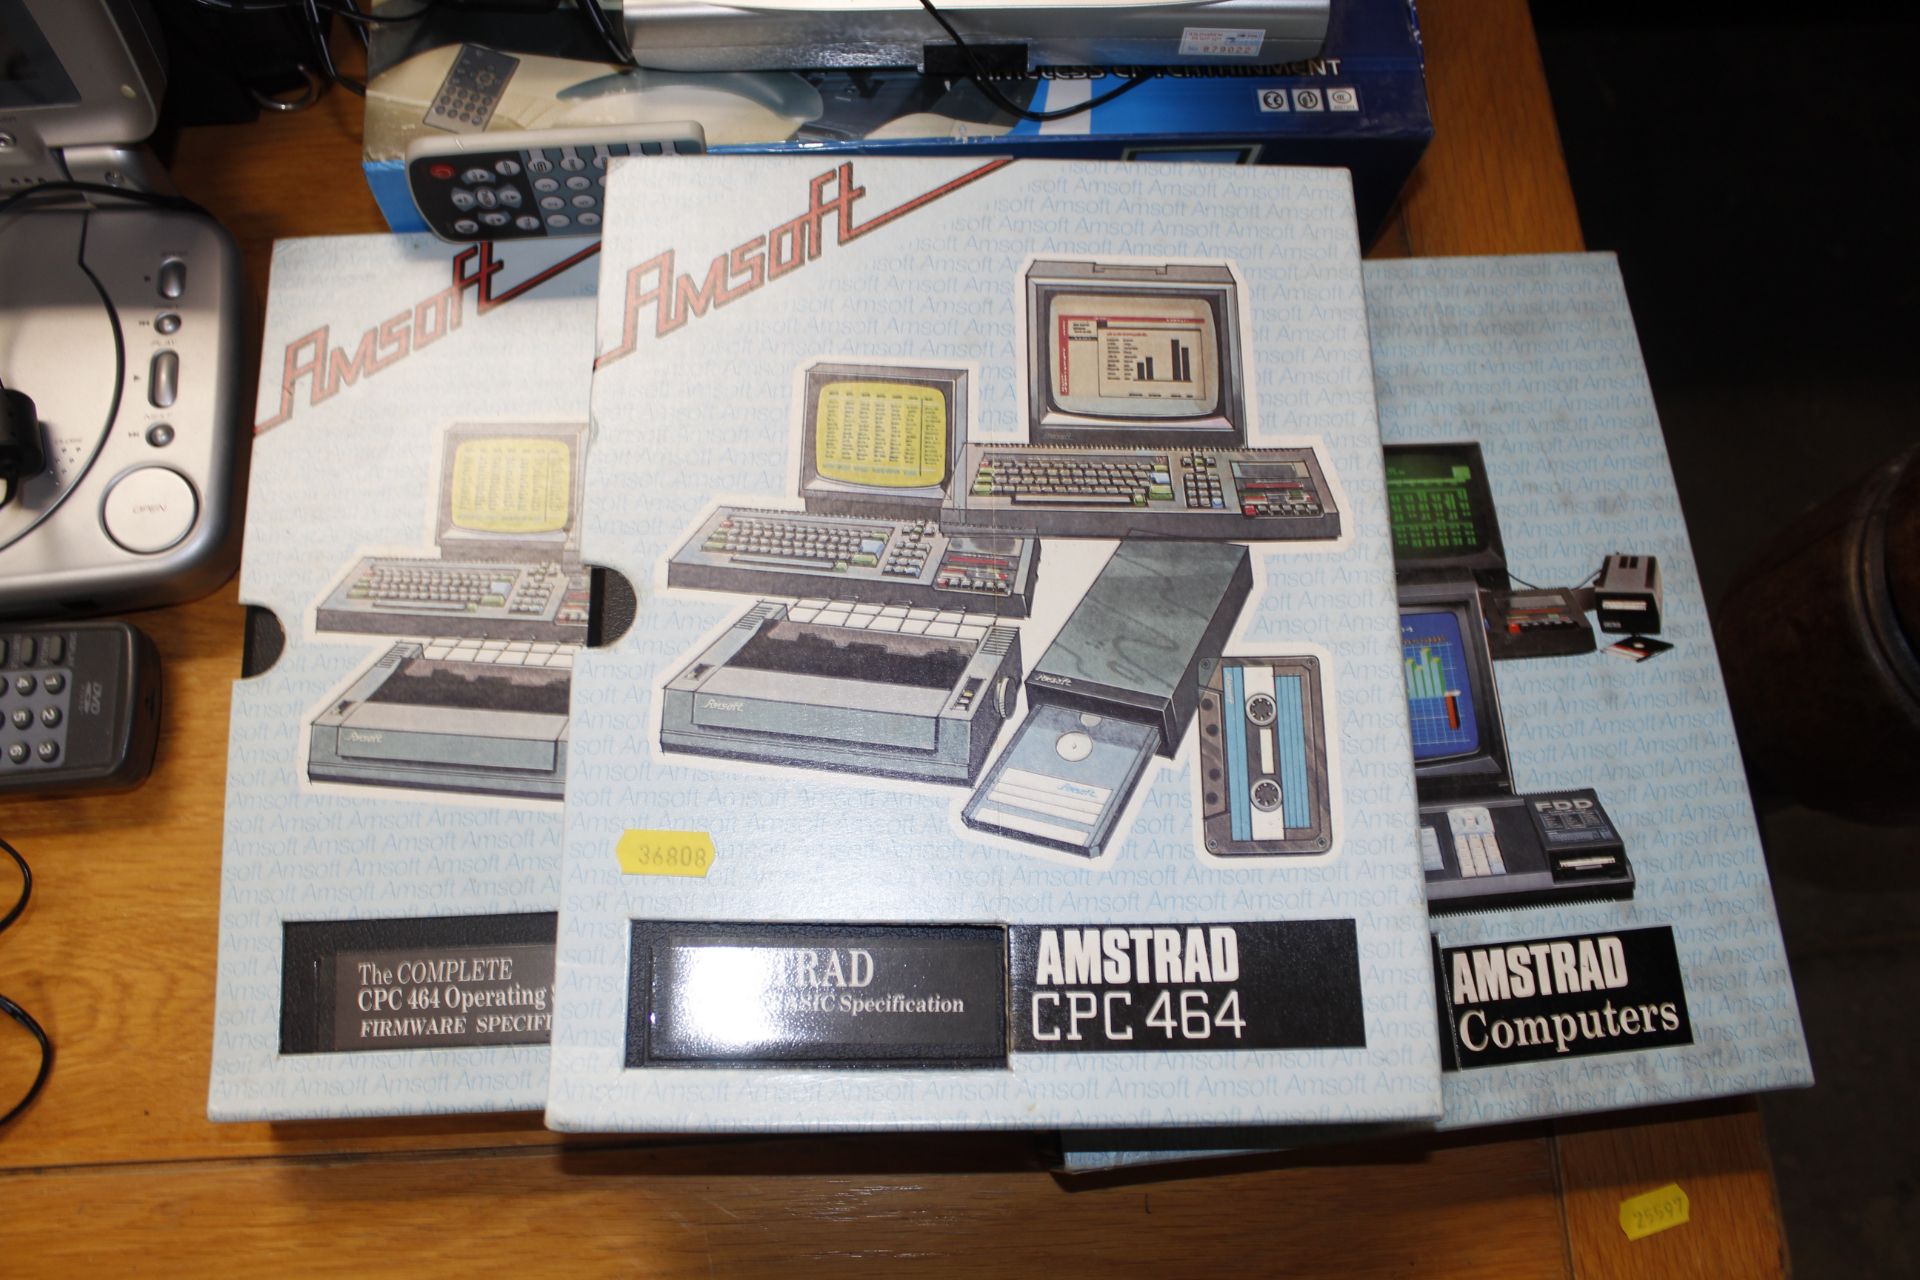 A collection of DVD players, Amstrad software, sca - Image 2 of 3